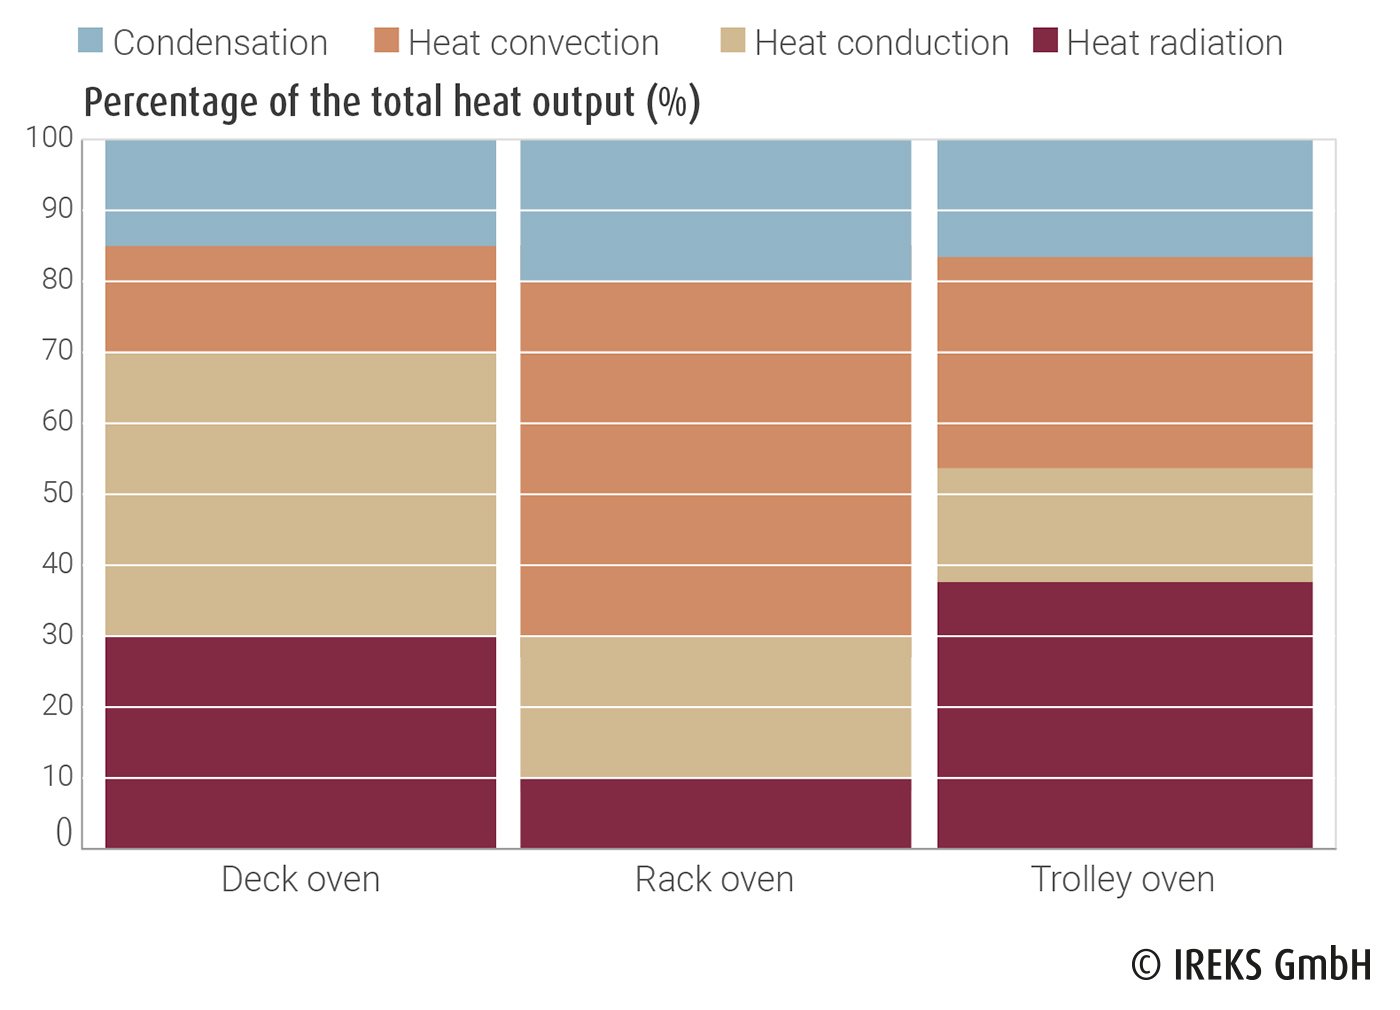 Percentage shares of the total heat output for different furnace systems 